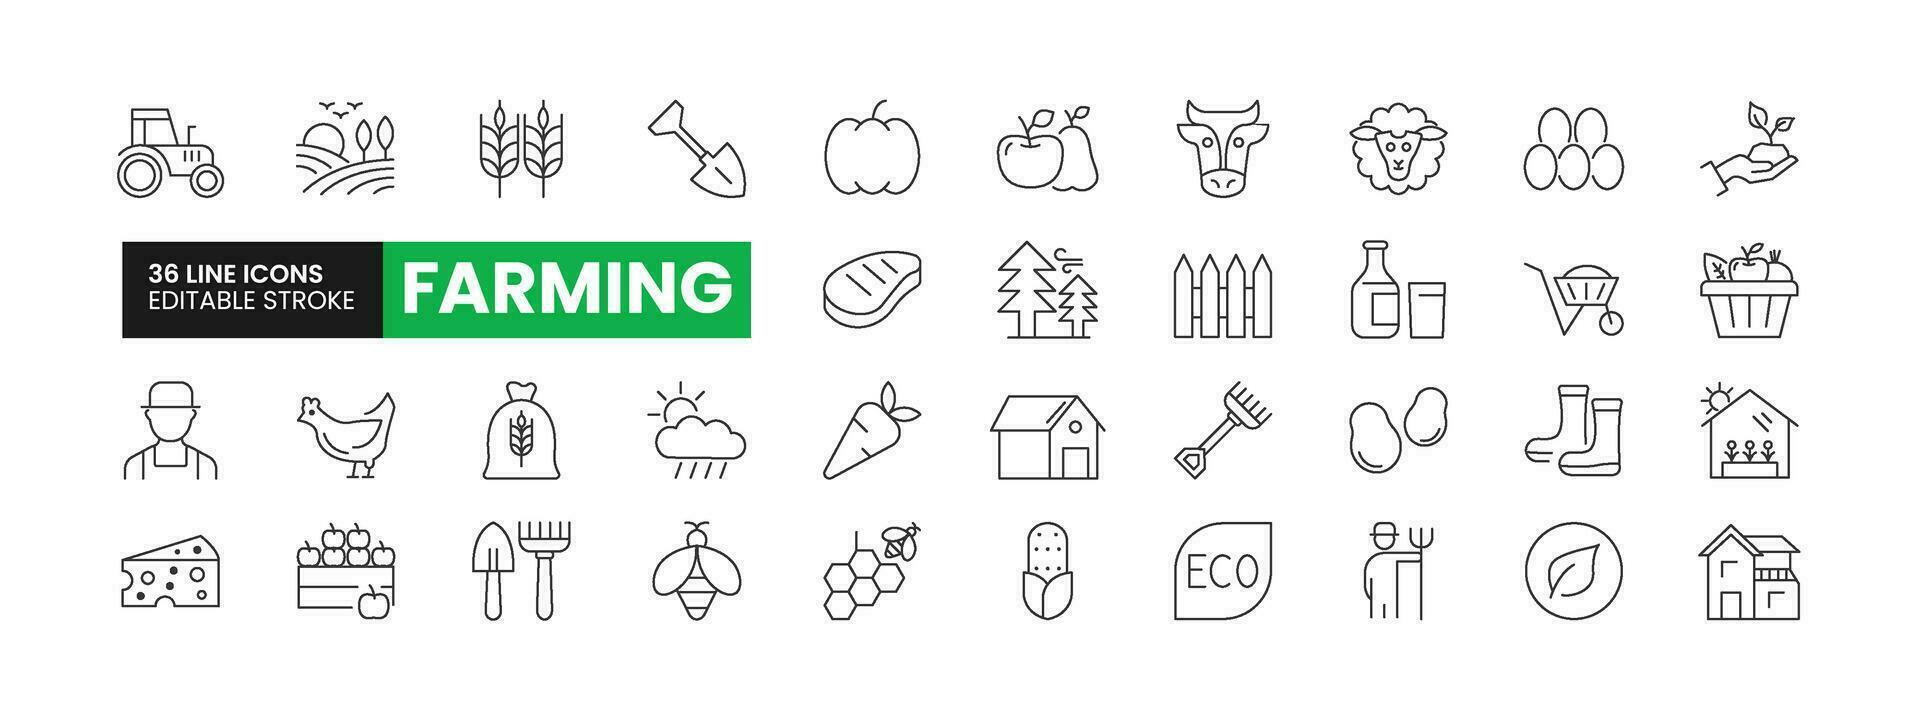 Set of 36 Farming line icons set. Farming outline icons with editable stroke collection. Includes Cow, Sheep, Barn, Farmer, Tractor, and More. vector